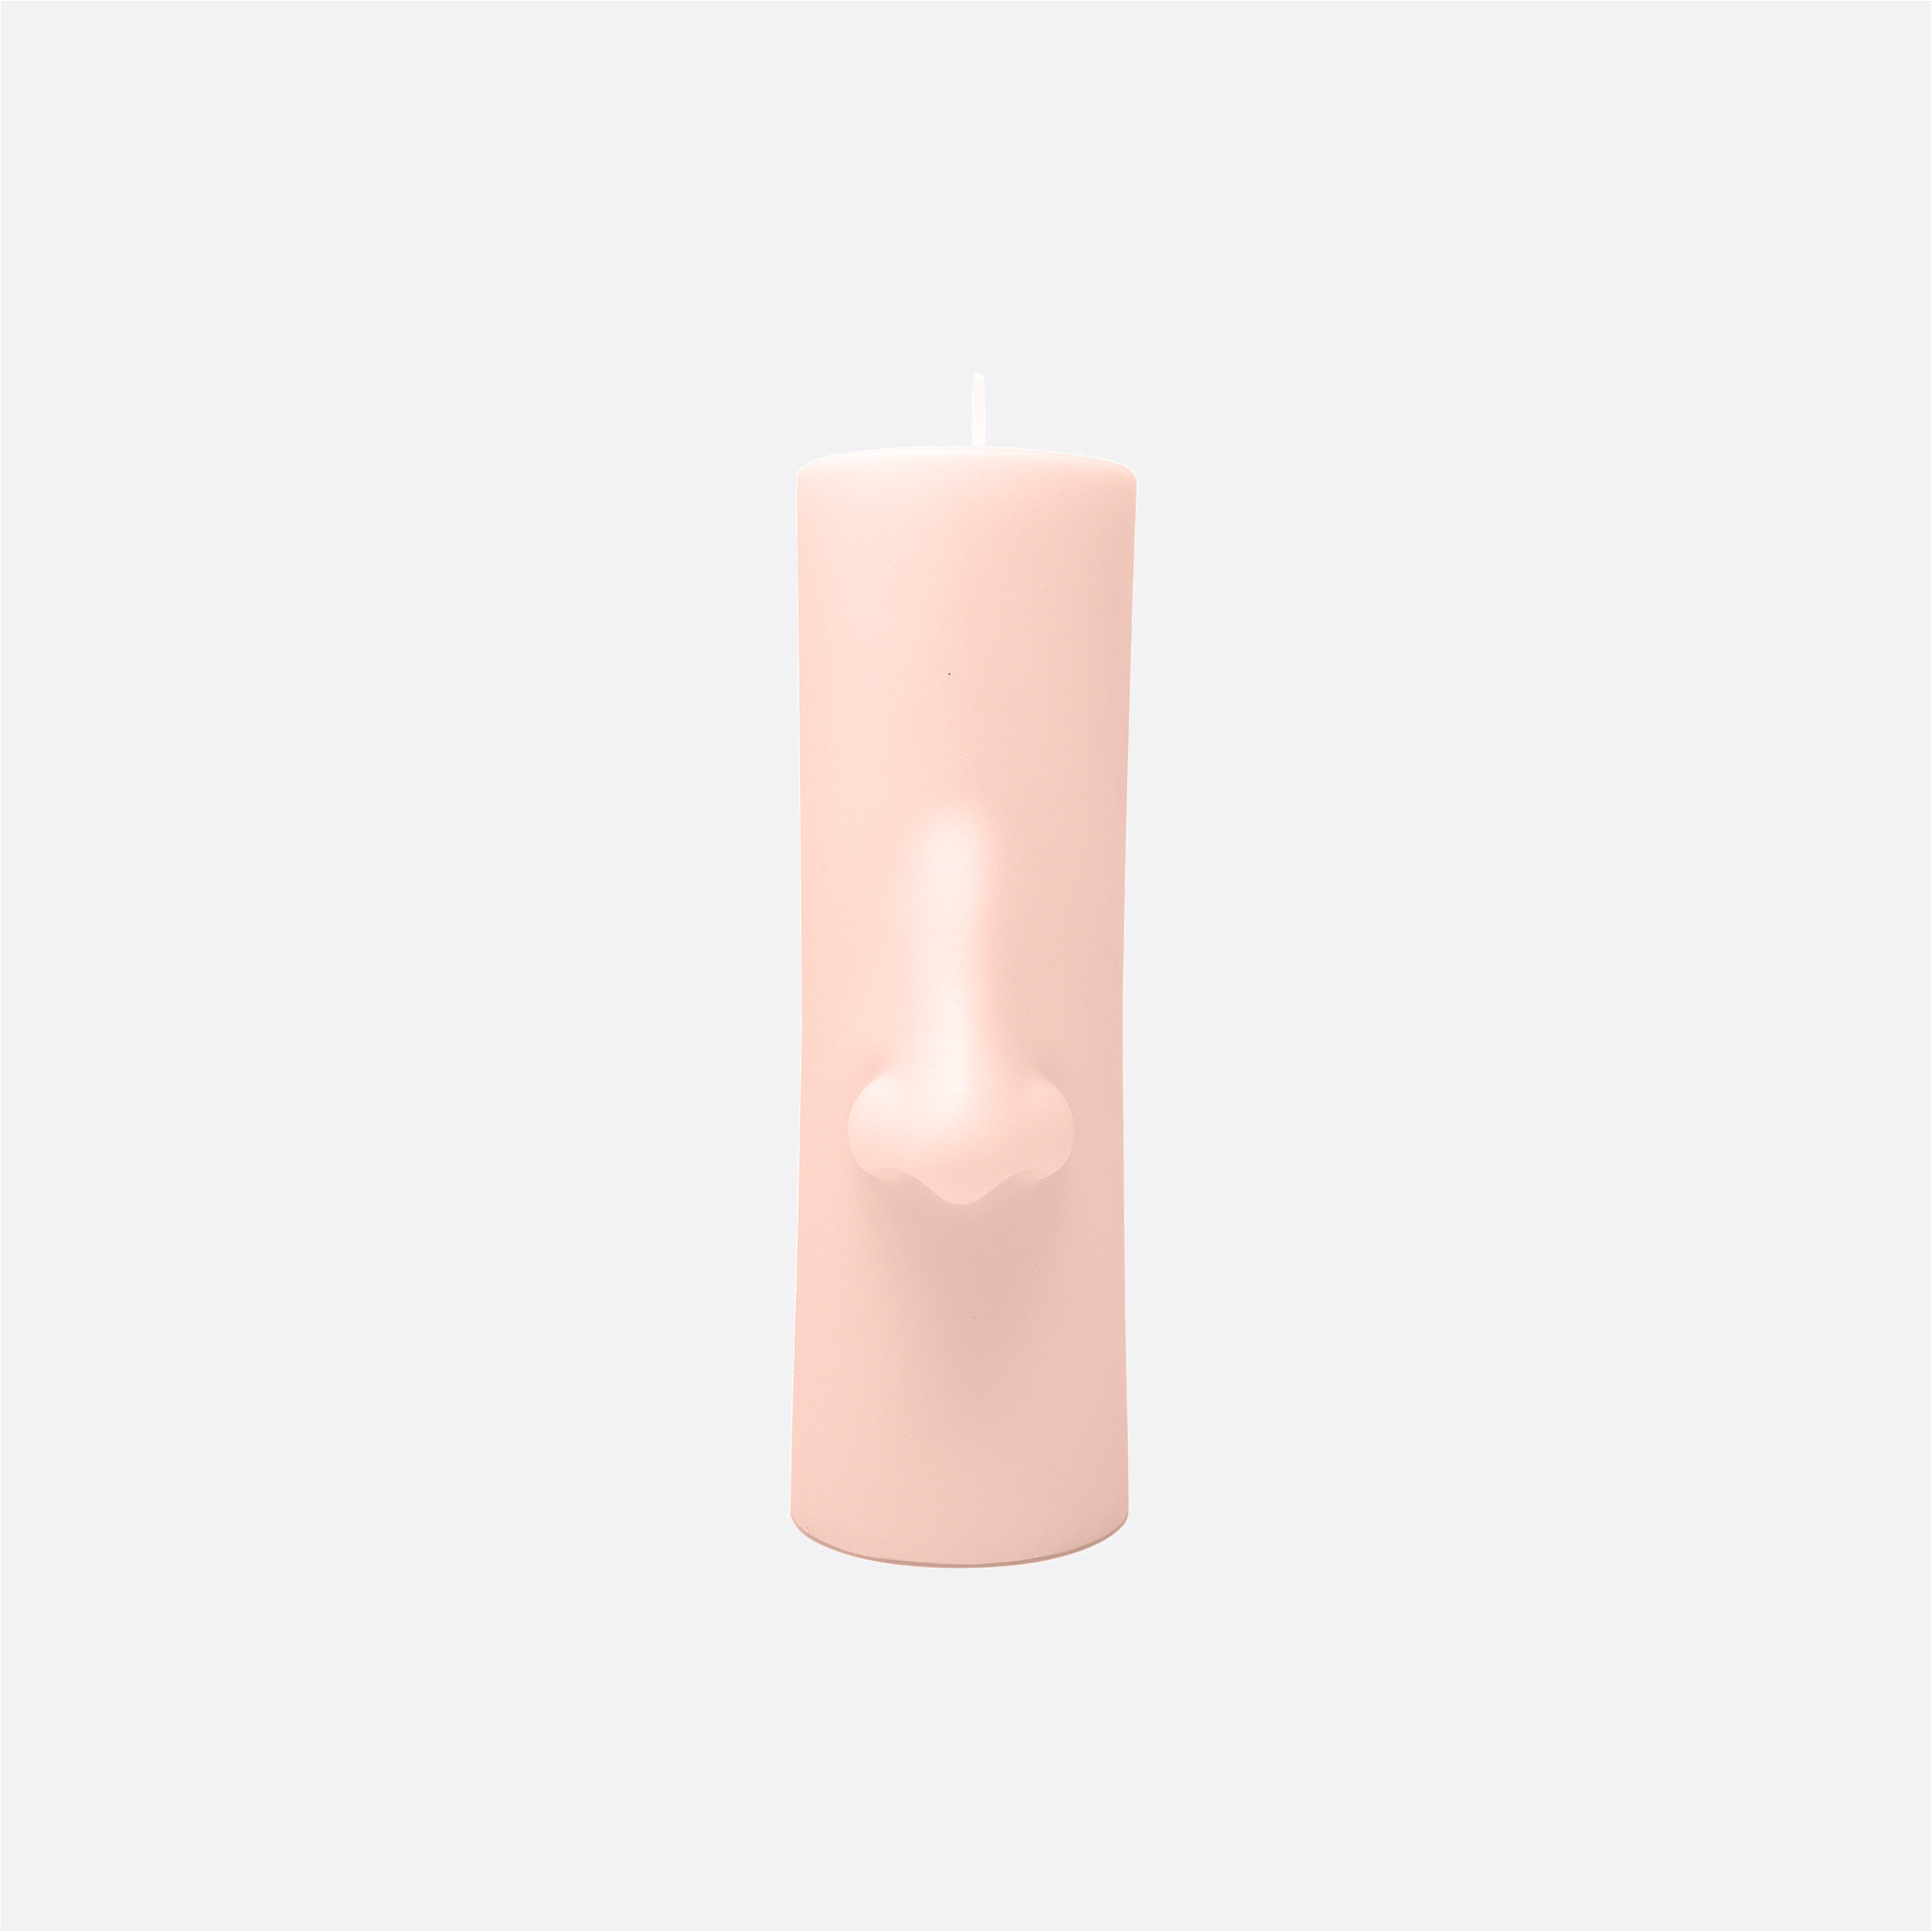 Nose Form Candle, blush pink